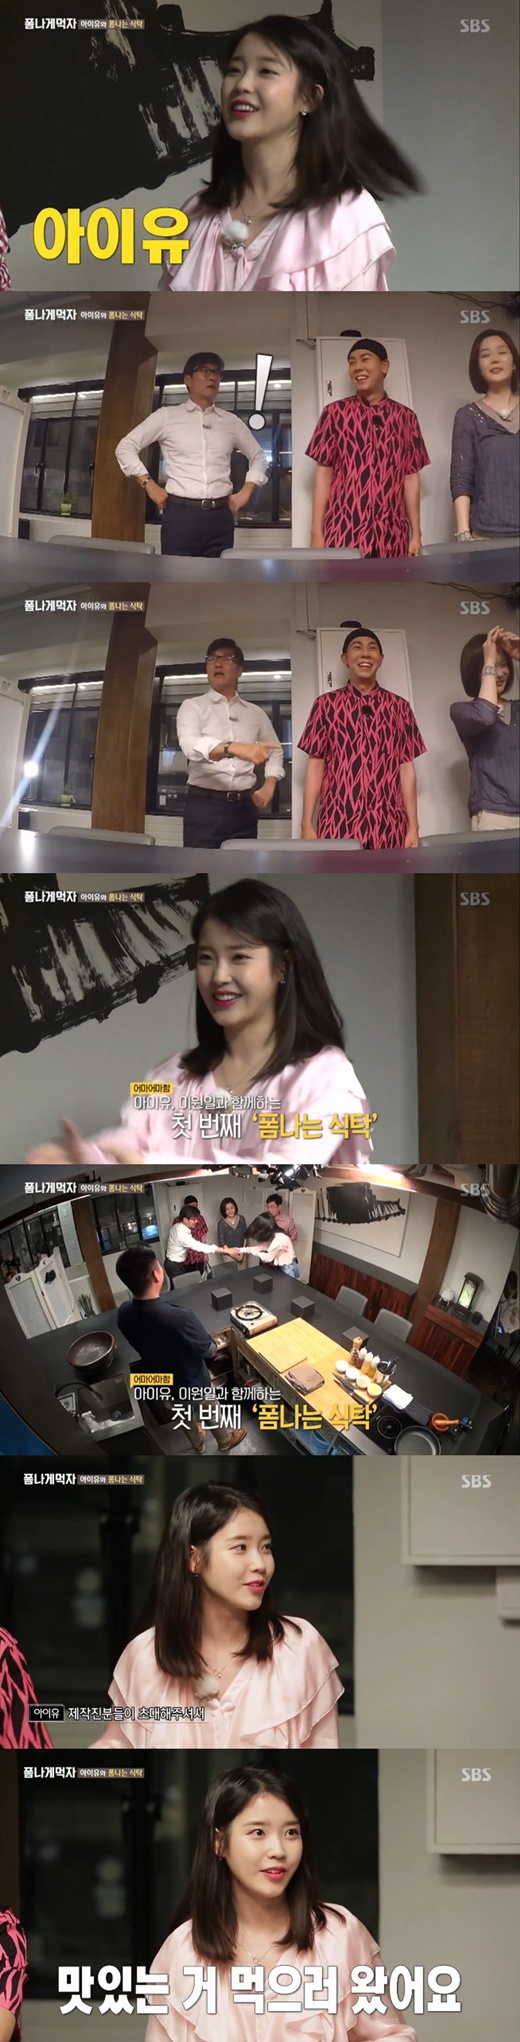 Singer IU made a surprise appearance on SBS Lets eat it.On the 7th, SBS Food Enjoy, the story of MCs who left for the budget of Chungcheongbuk-do in search of the food independants who were in danger of disappearing, was drawn.On this day, 4MC Lee Kyung-gyu, Kim Sang-joong, Chae Rim and Rocco visited Lee Won-ils restaurant with a soaked Kimchi from the budget.Kim Sang-joong was pleased to say, Its IU! And IU laughed and shook hands.The producers invited me, IU said, referring to the sudden appearance as a surprise guest. I just came to say that I could eat delicious things.